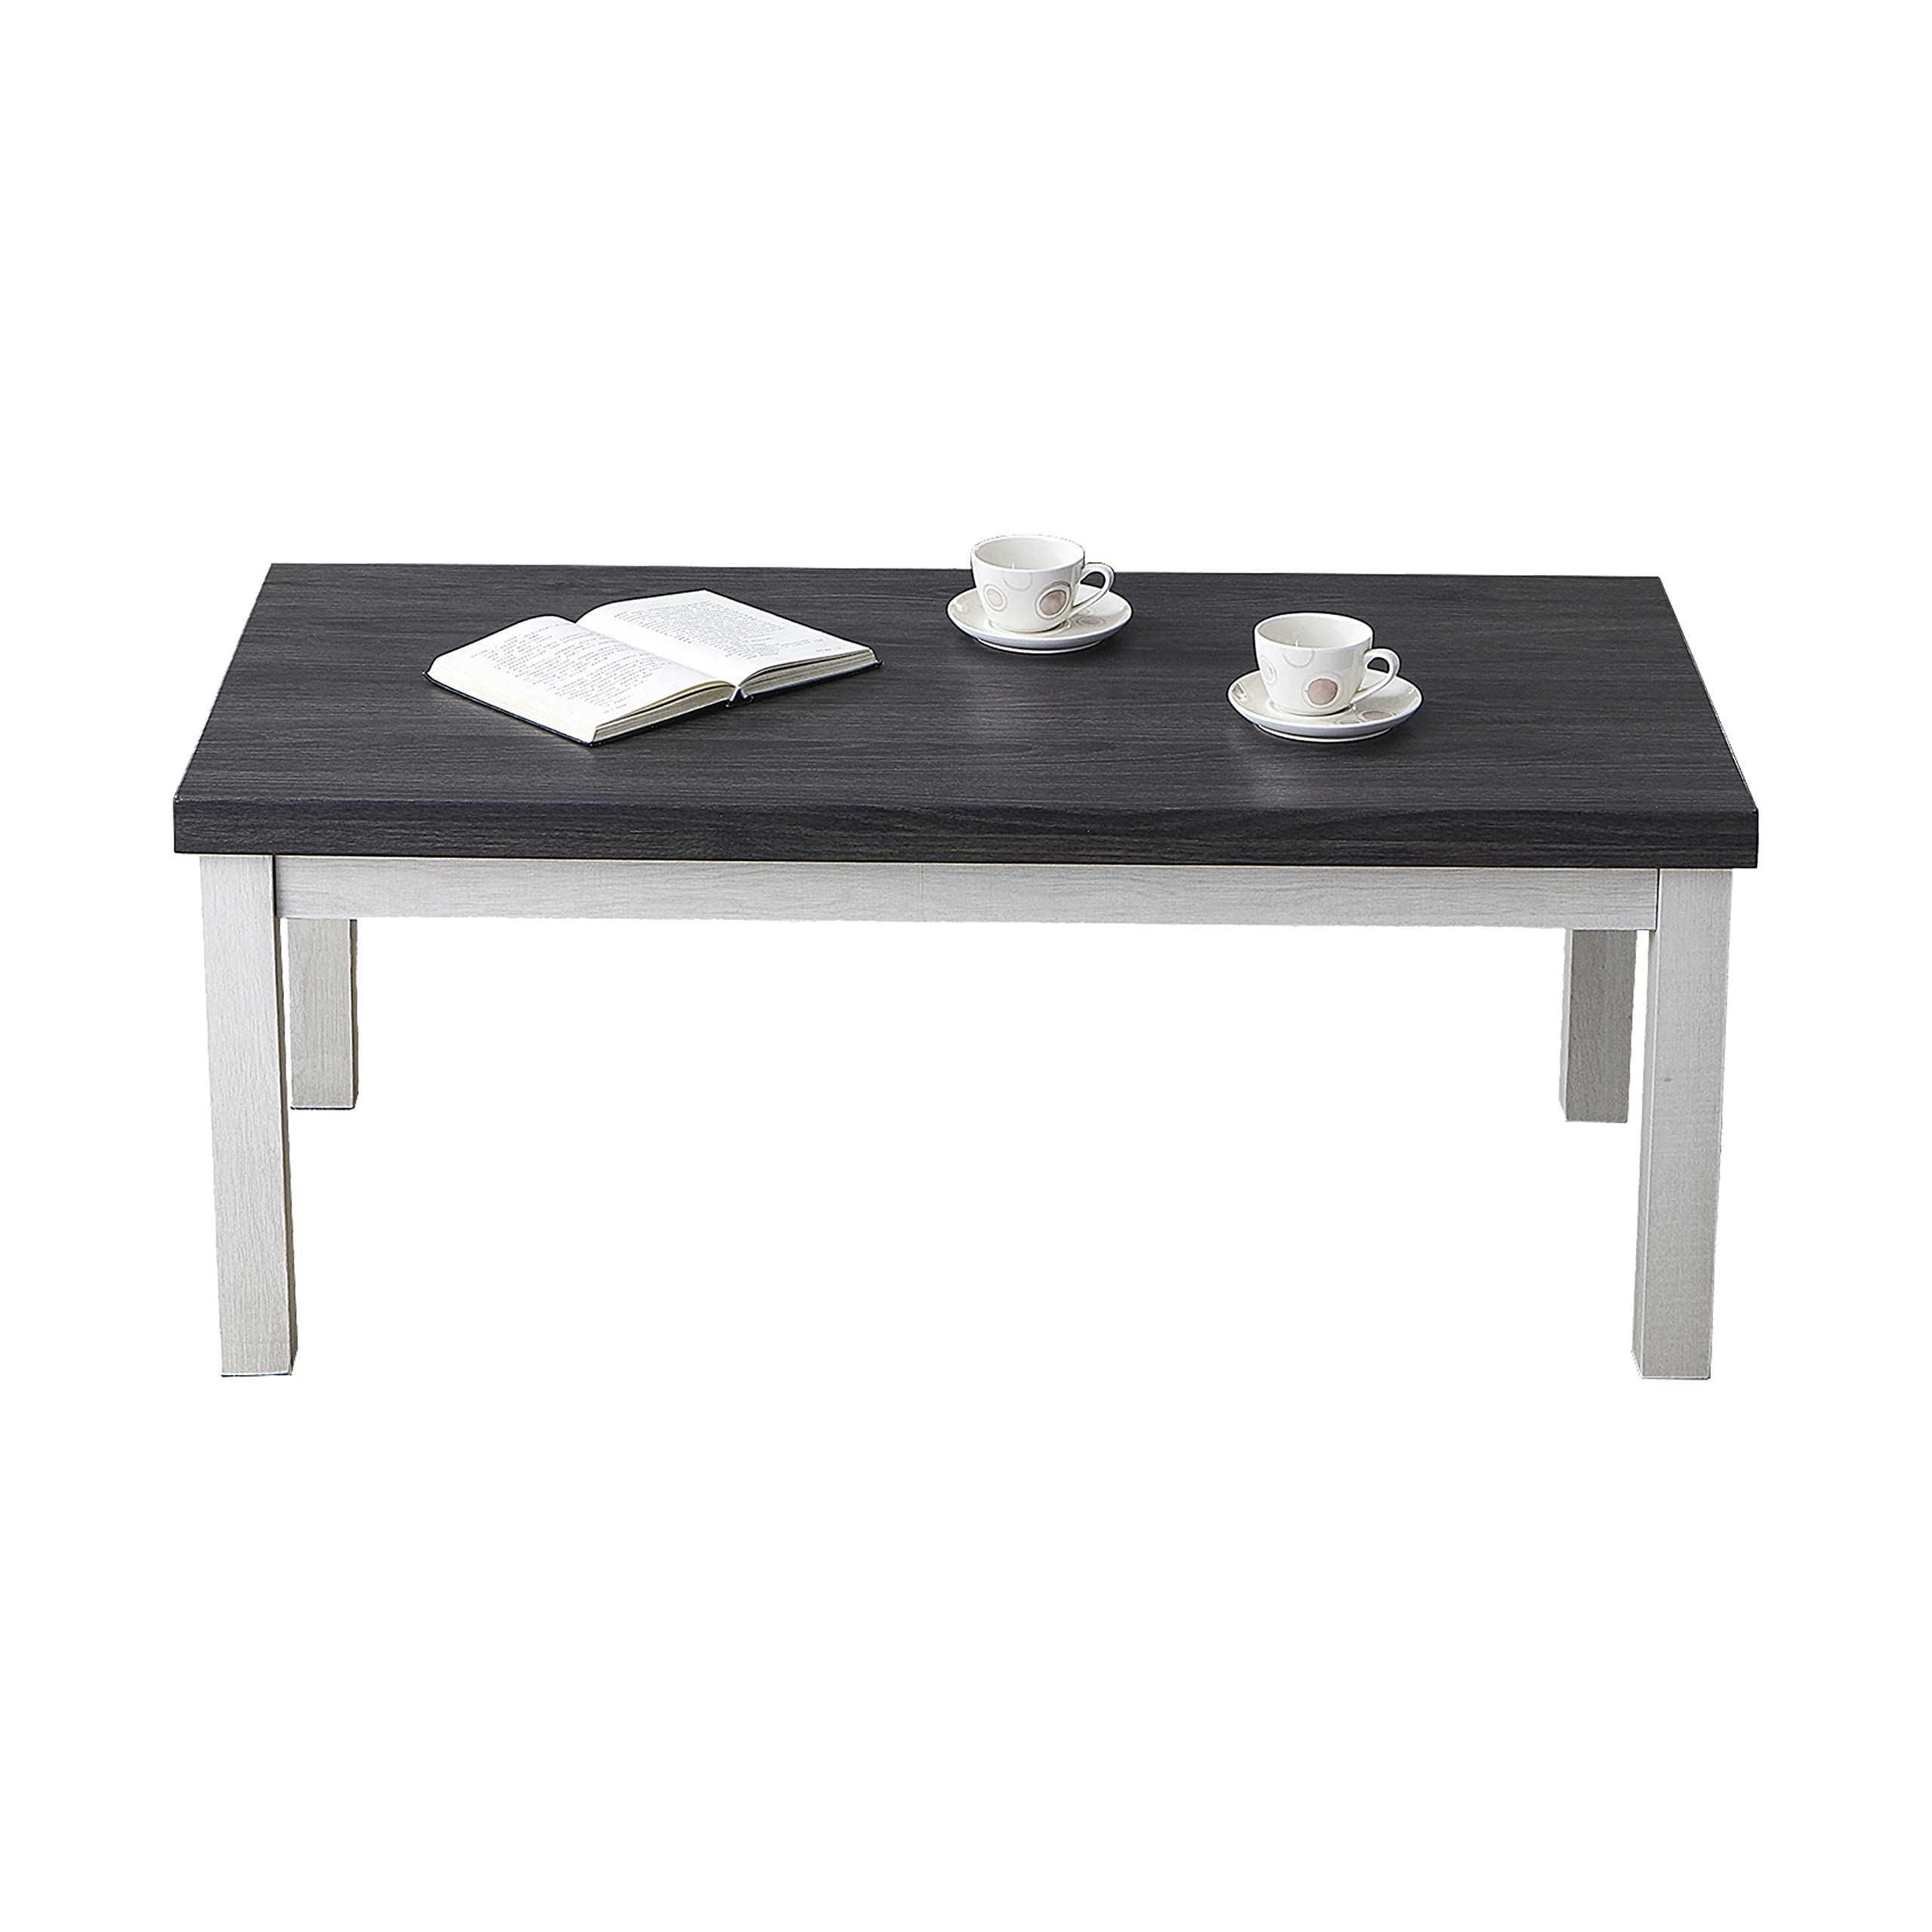 2019 Pemberly Row Replicated Wood Coffee Tables Pertaining To Amazon: Roundhill Furniture Ronan Two Tone Wood Rectangle Coffee Table,  Gray : Home & Kitchen (Photo 7 of 10)